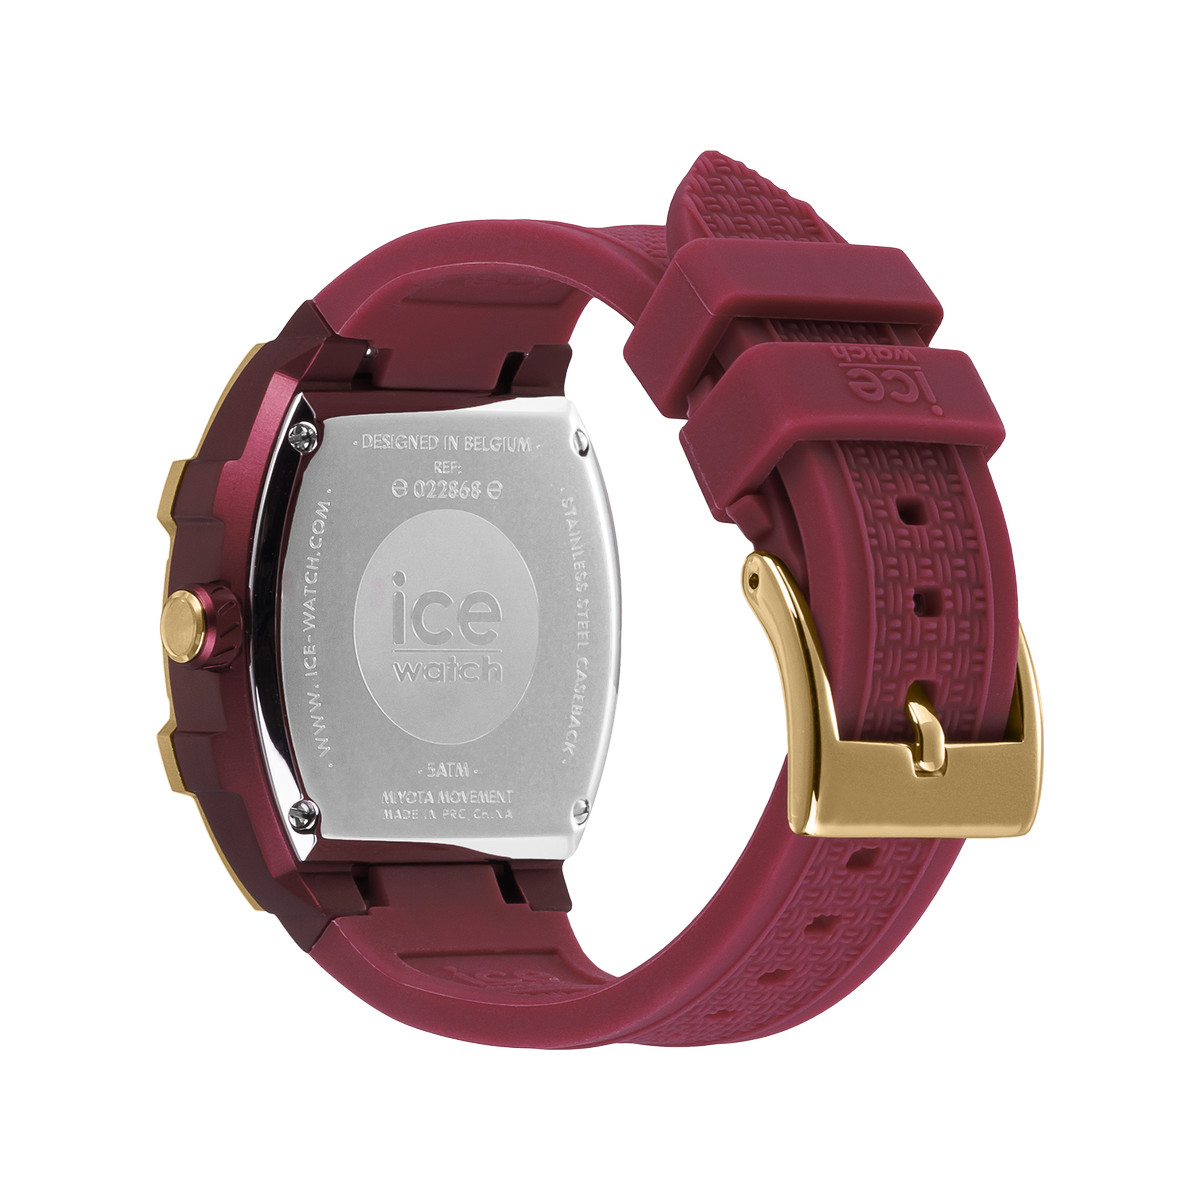 Montre ICE WATCH Ice boliday femme bracelet silicone rouge - vue 3